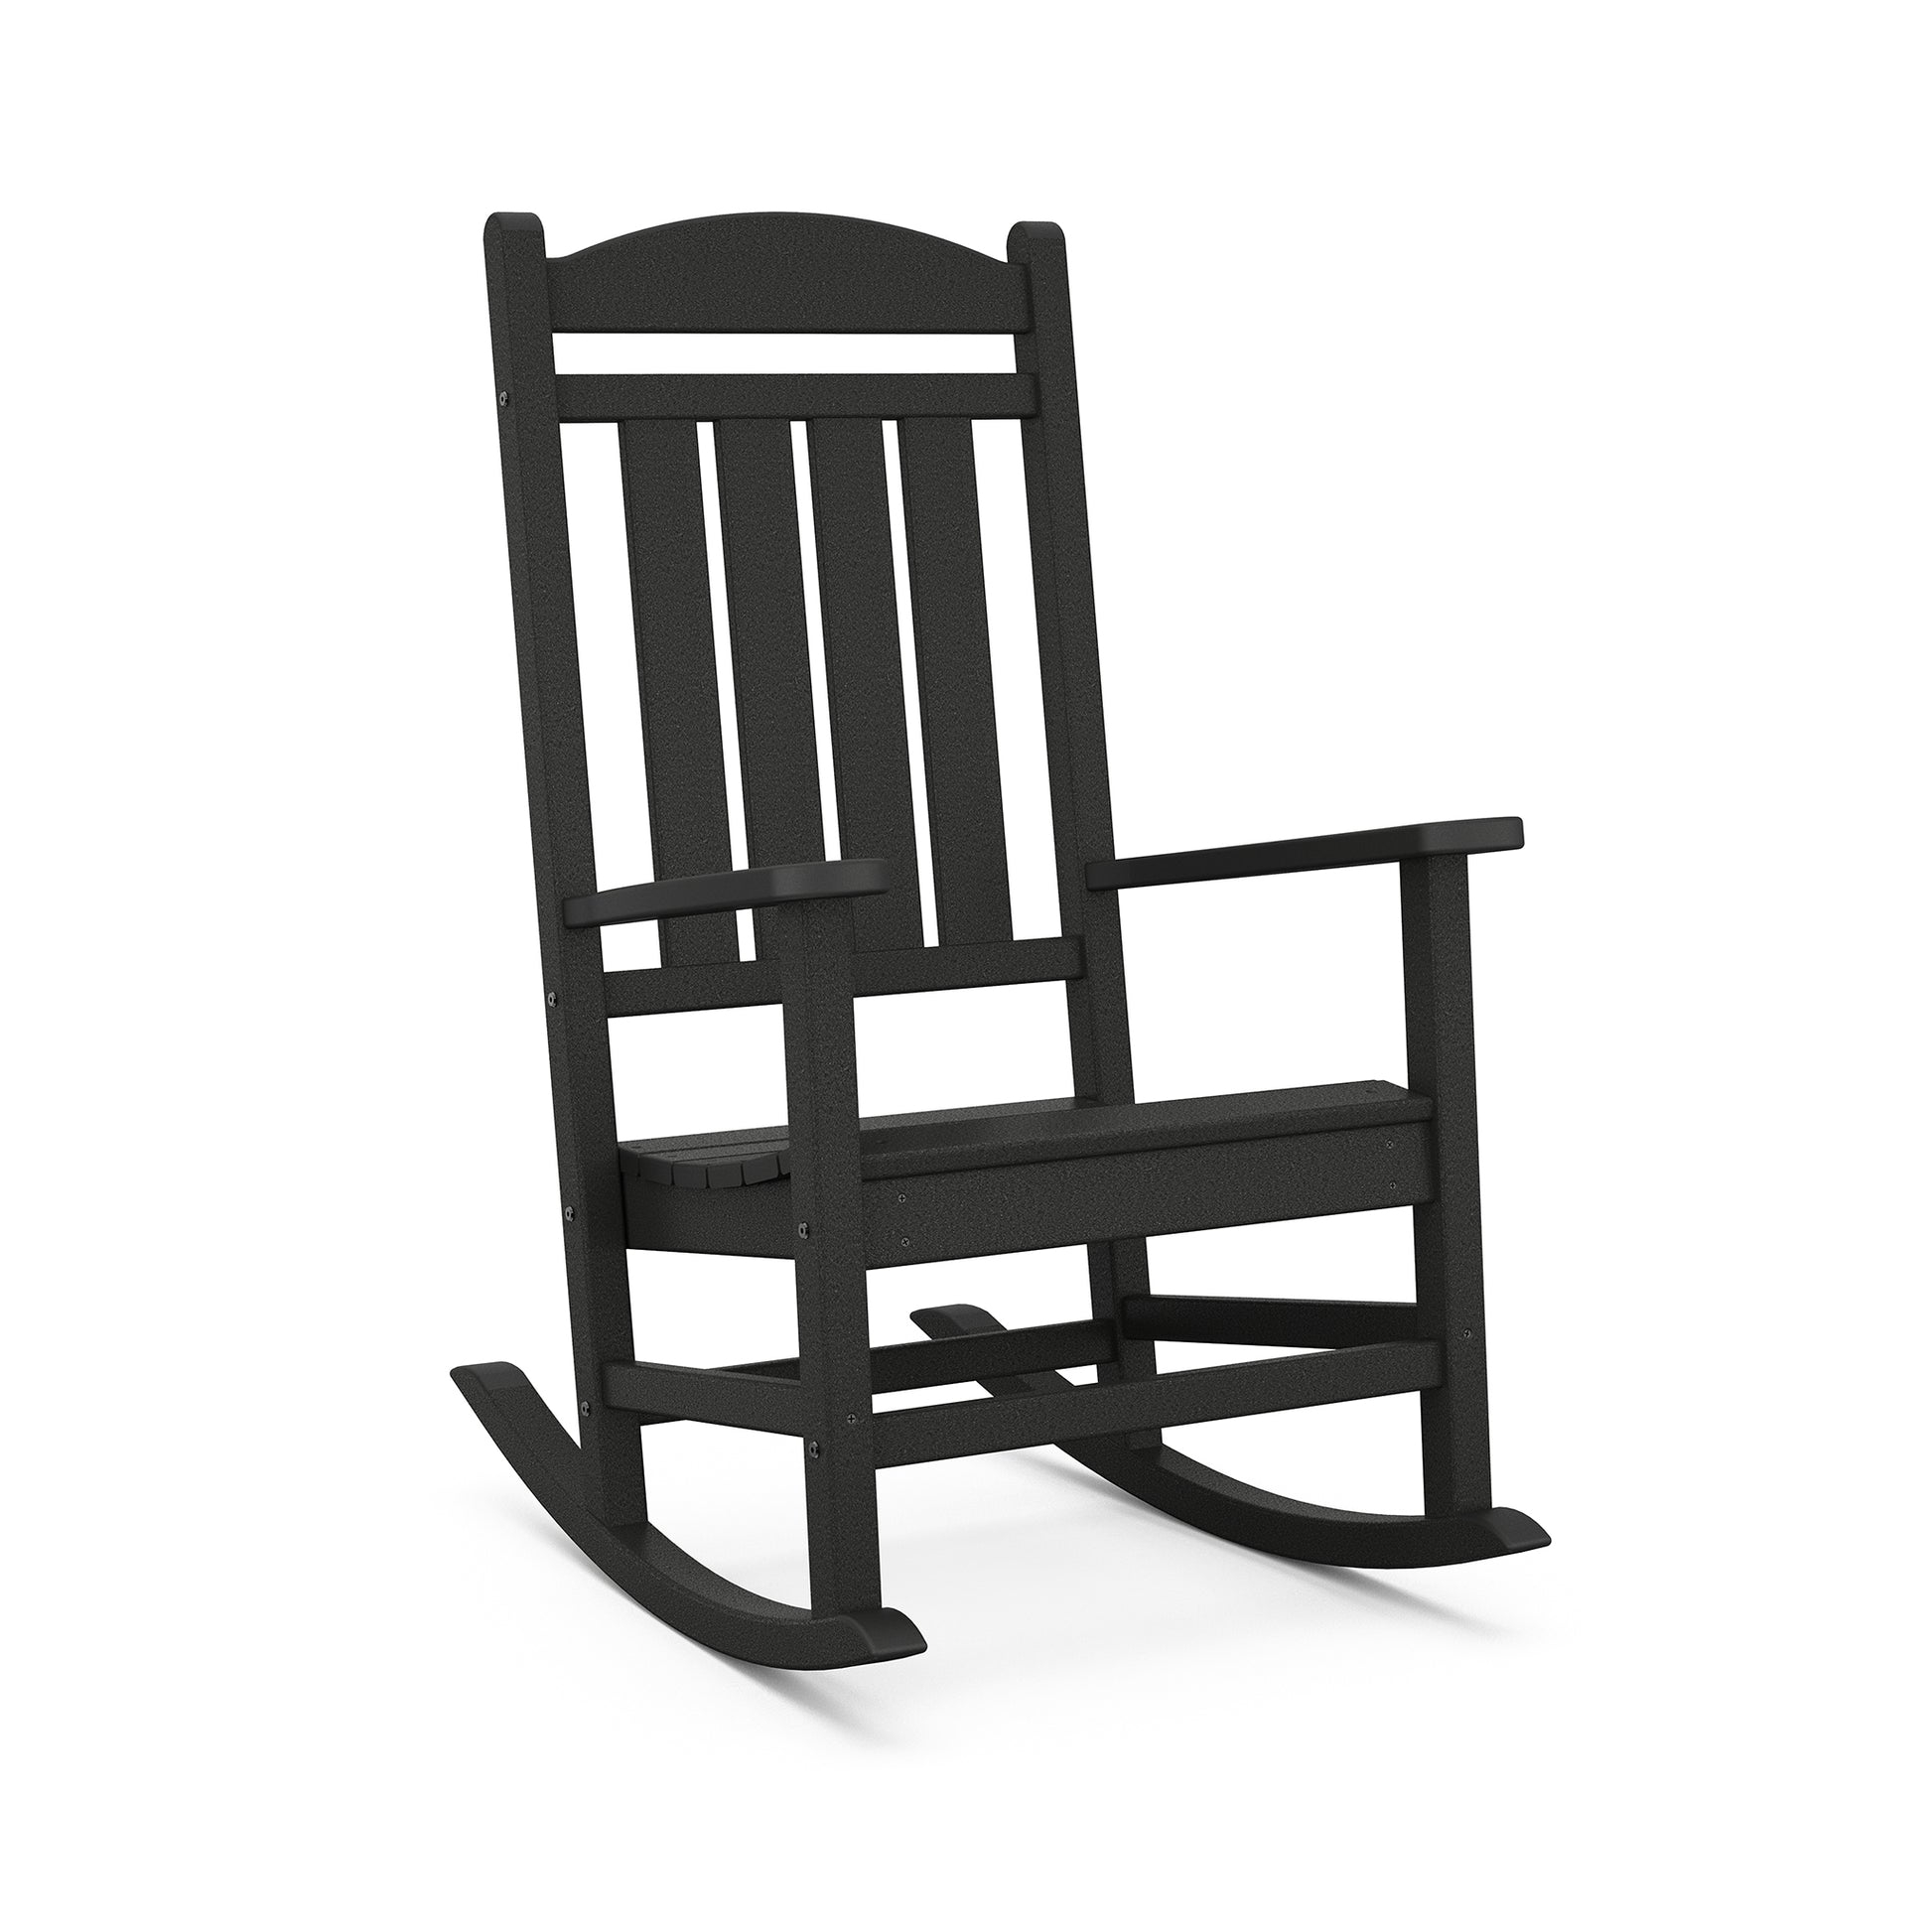 A black POLYWOOD Presidential Outdoor Rocking Chair isolated on a white background.